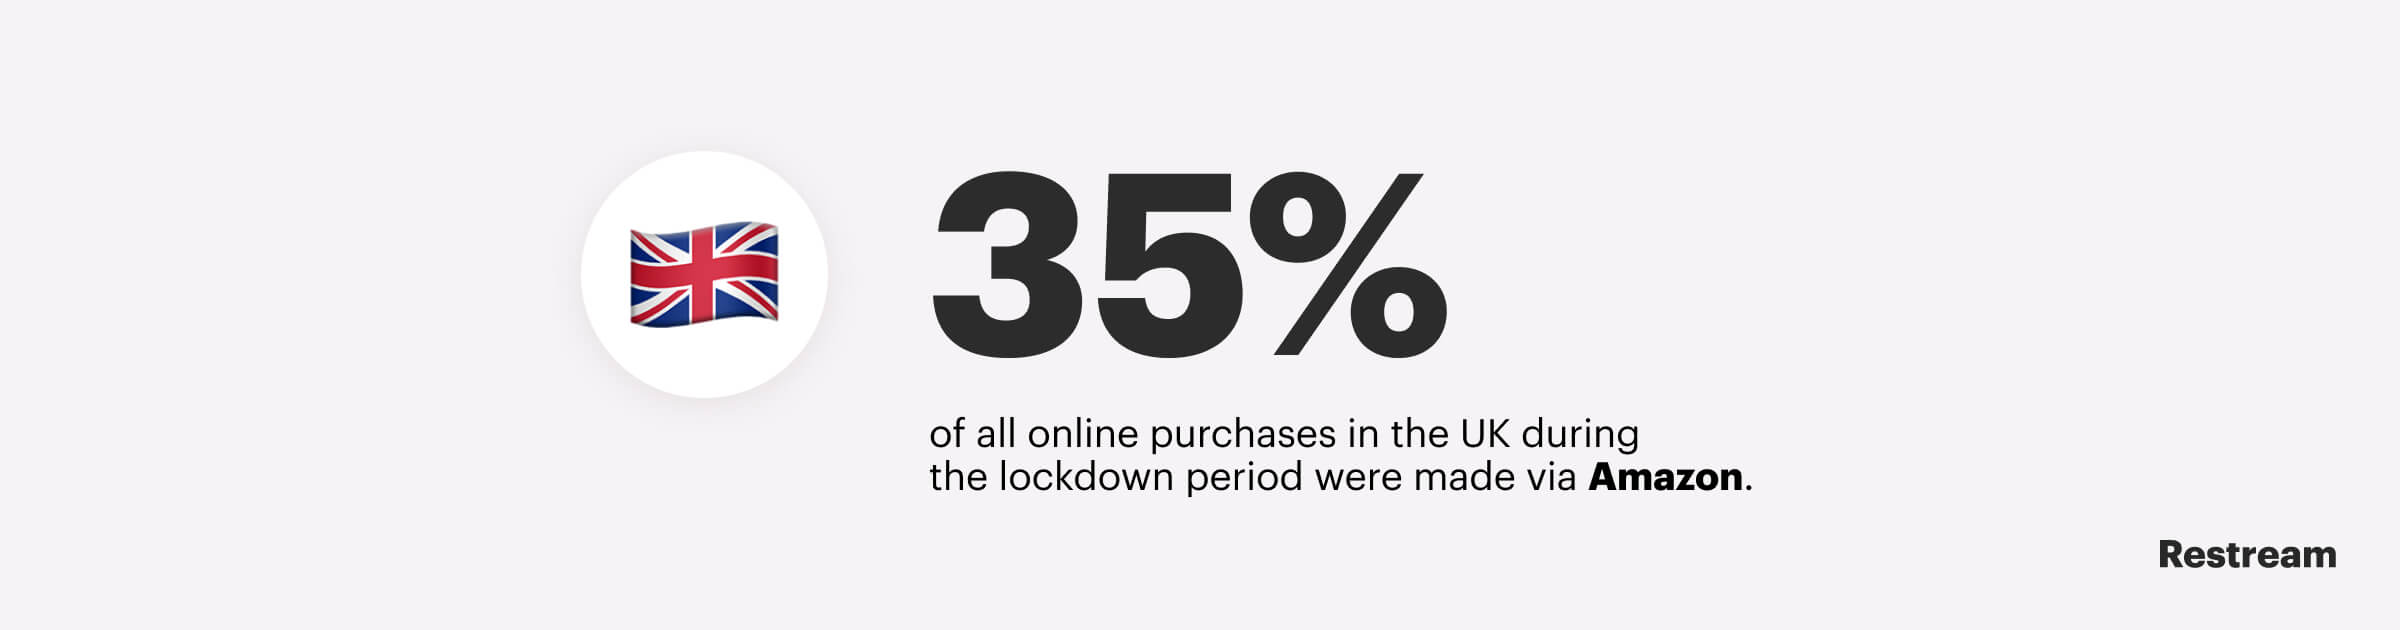 35% of all online purchases during the lockdown period were made via Amazon